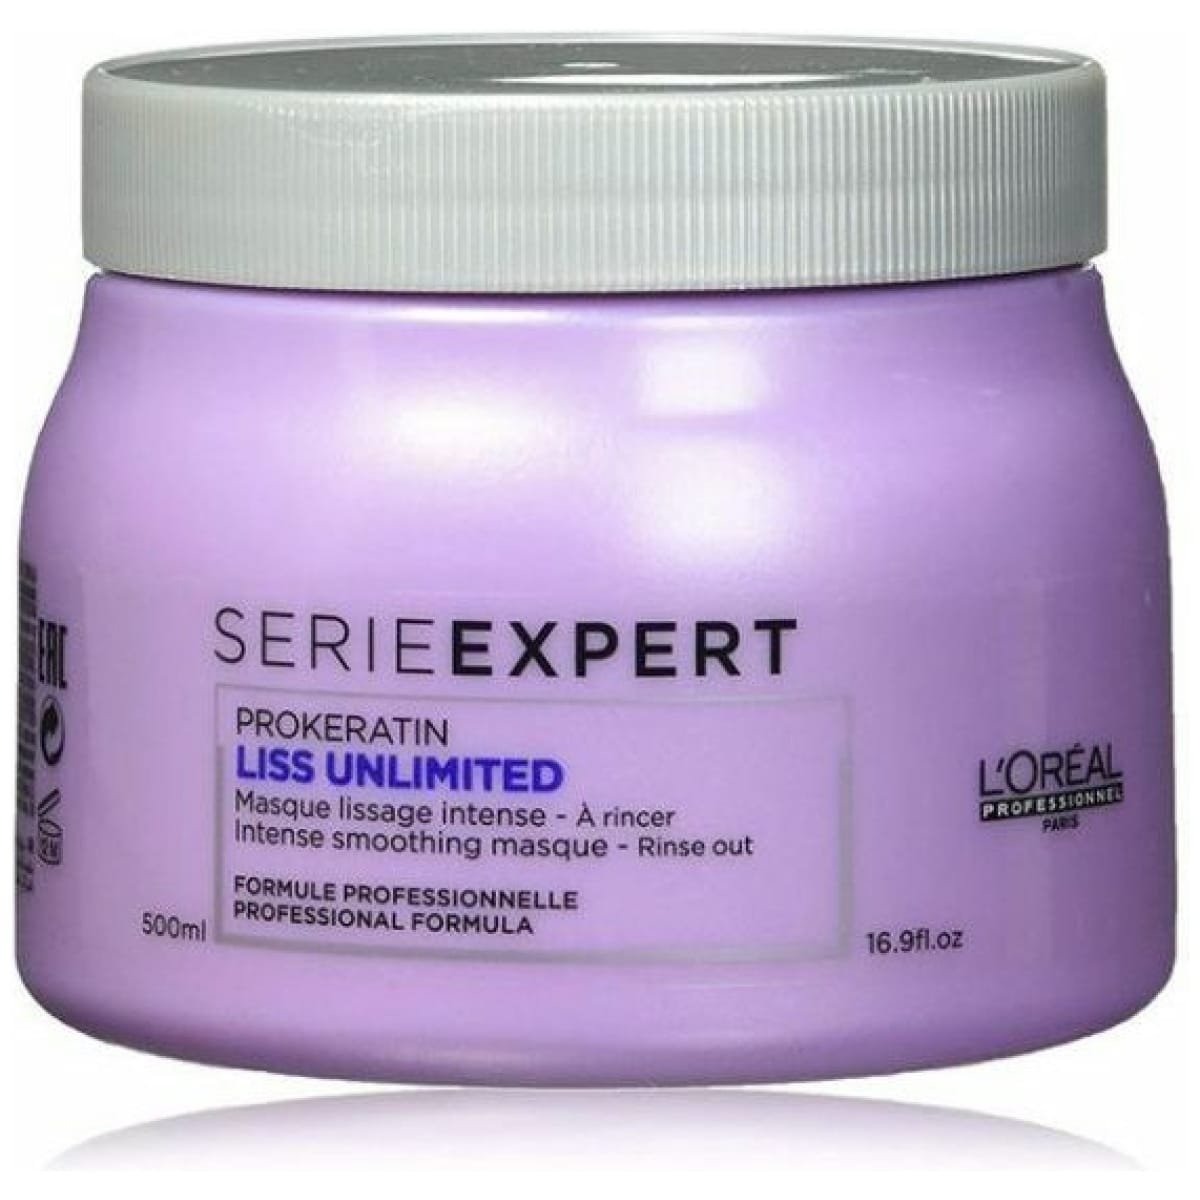 L'Oreal Professional Series Expert Prokeratin Liss Unlimited Mask 490Gm